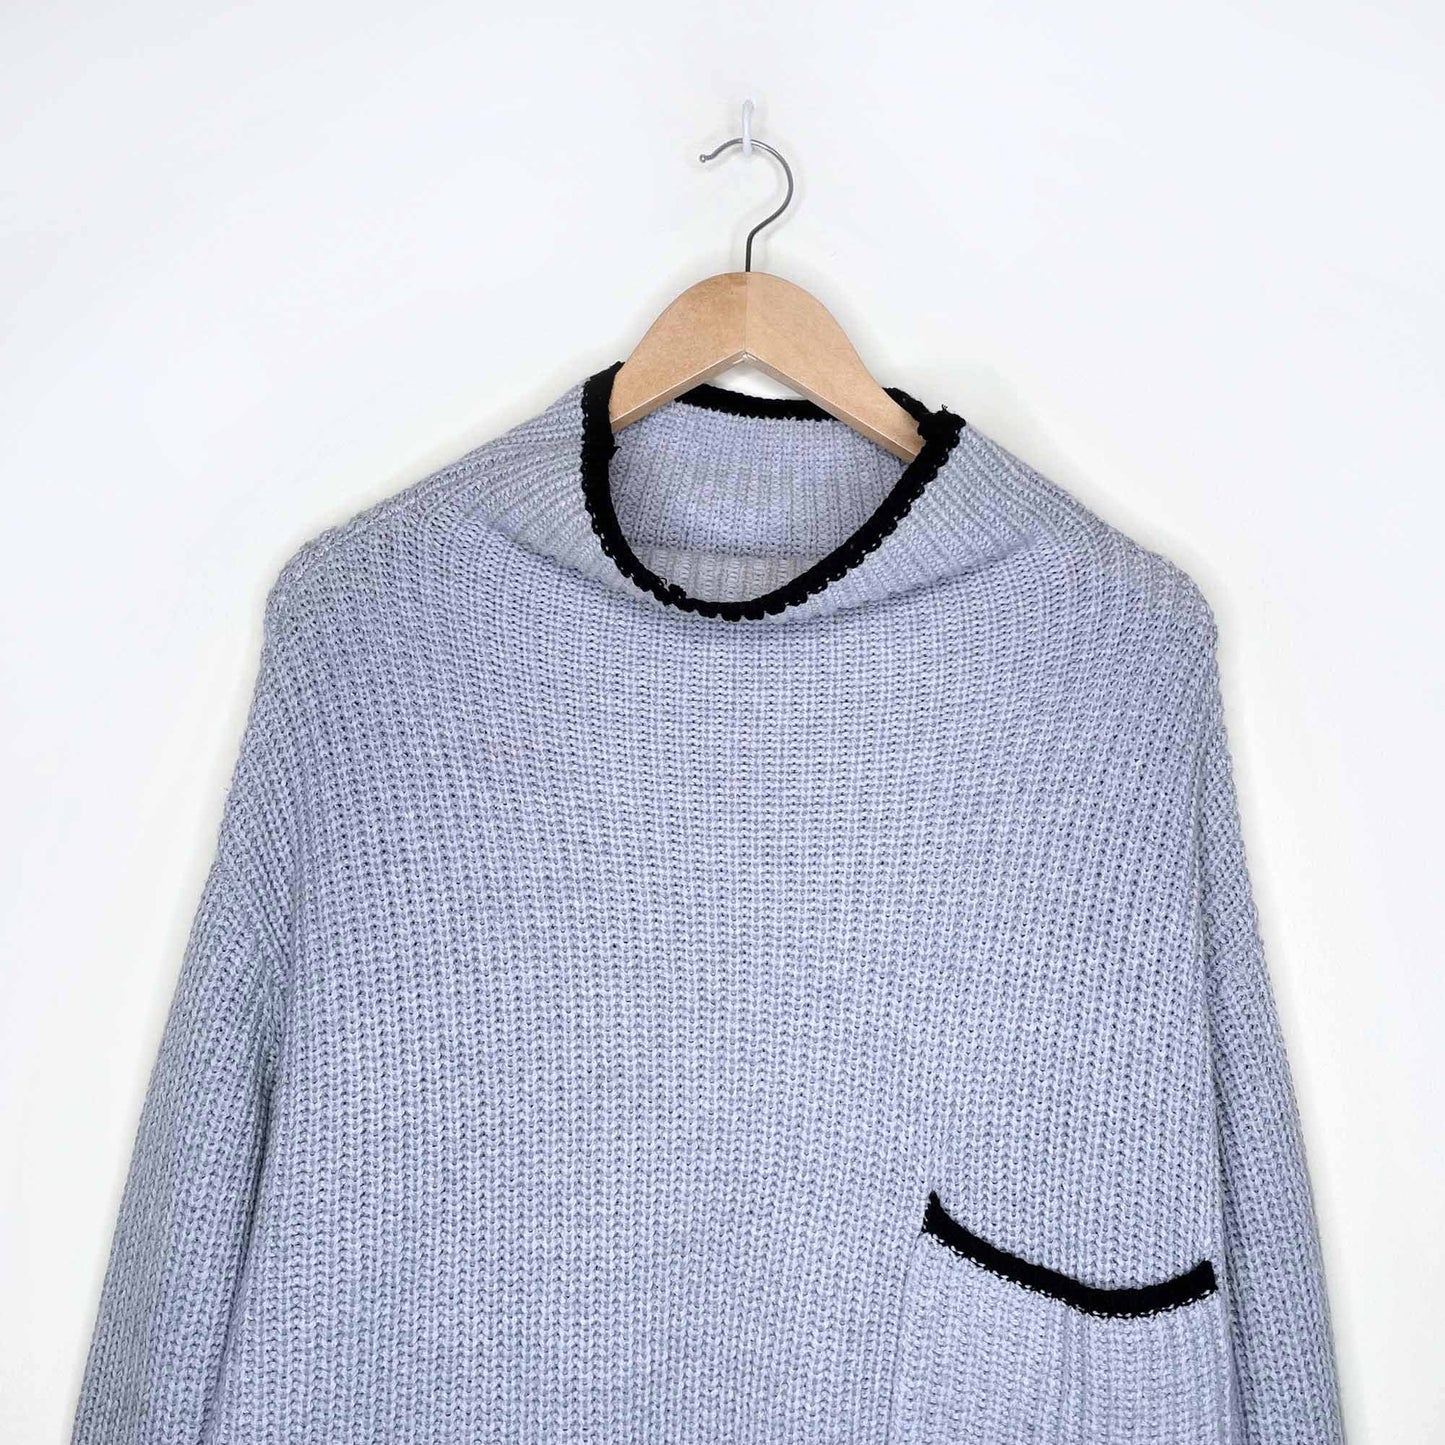 wilfred montpellier wool oversized knit pocket sweater - size 2